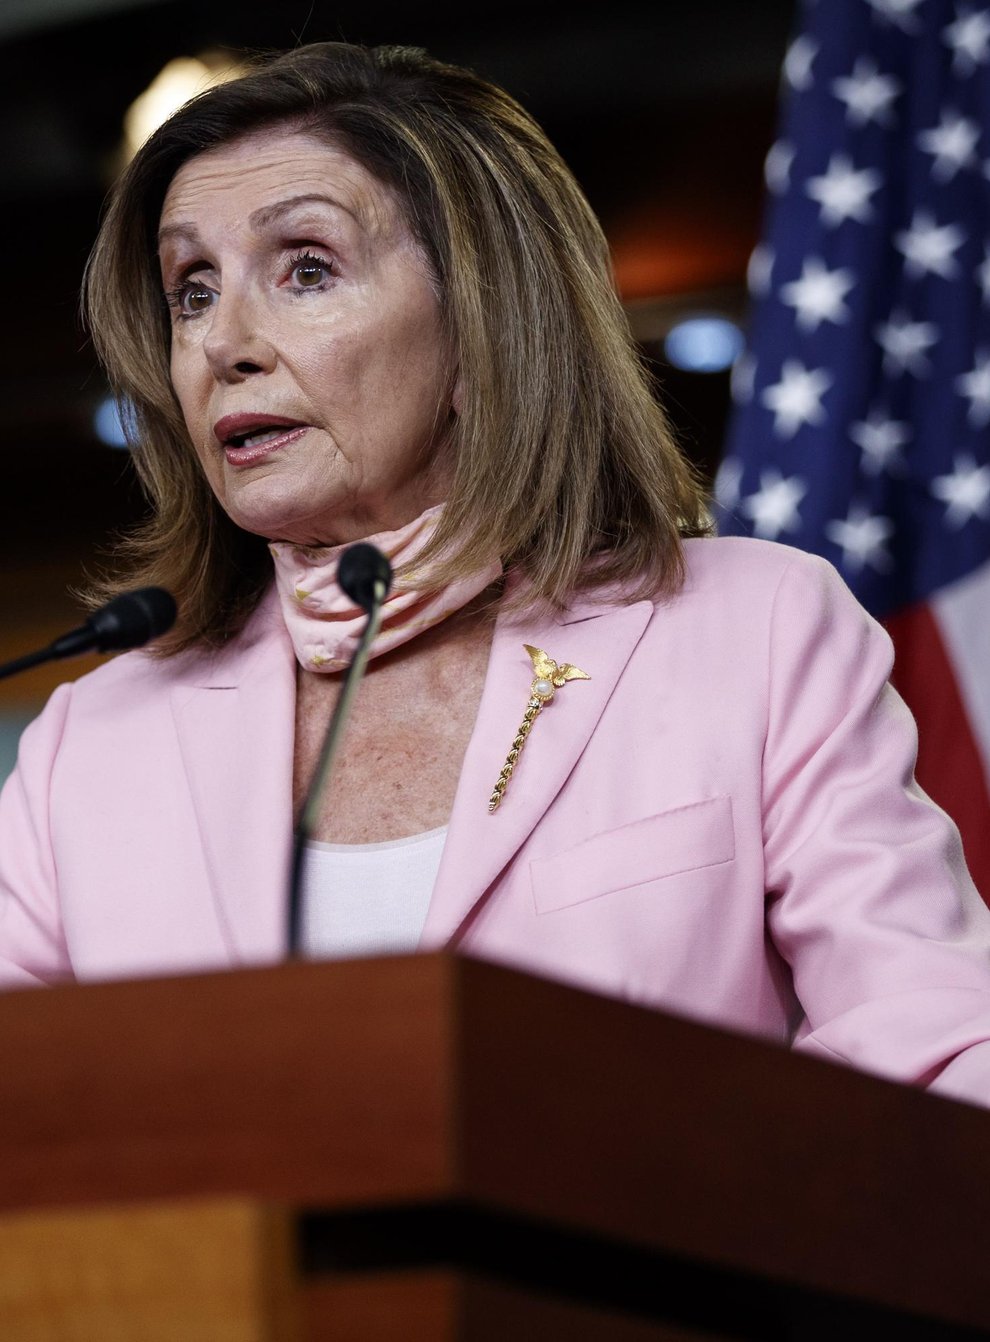 Pelosi has not condemned protesters